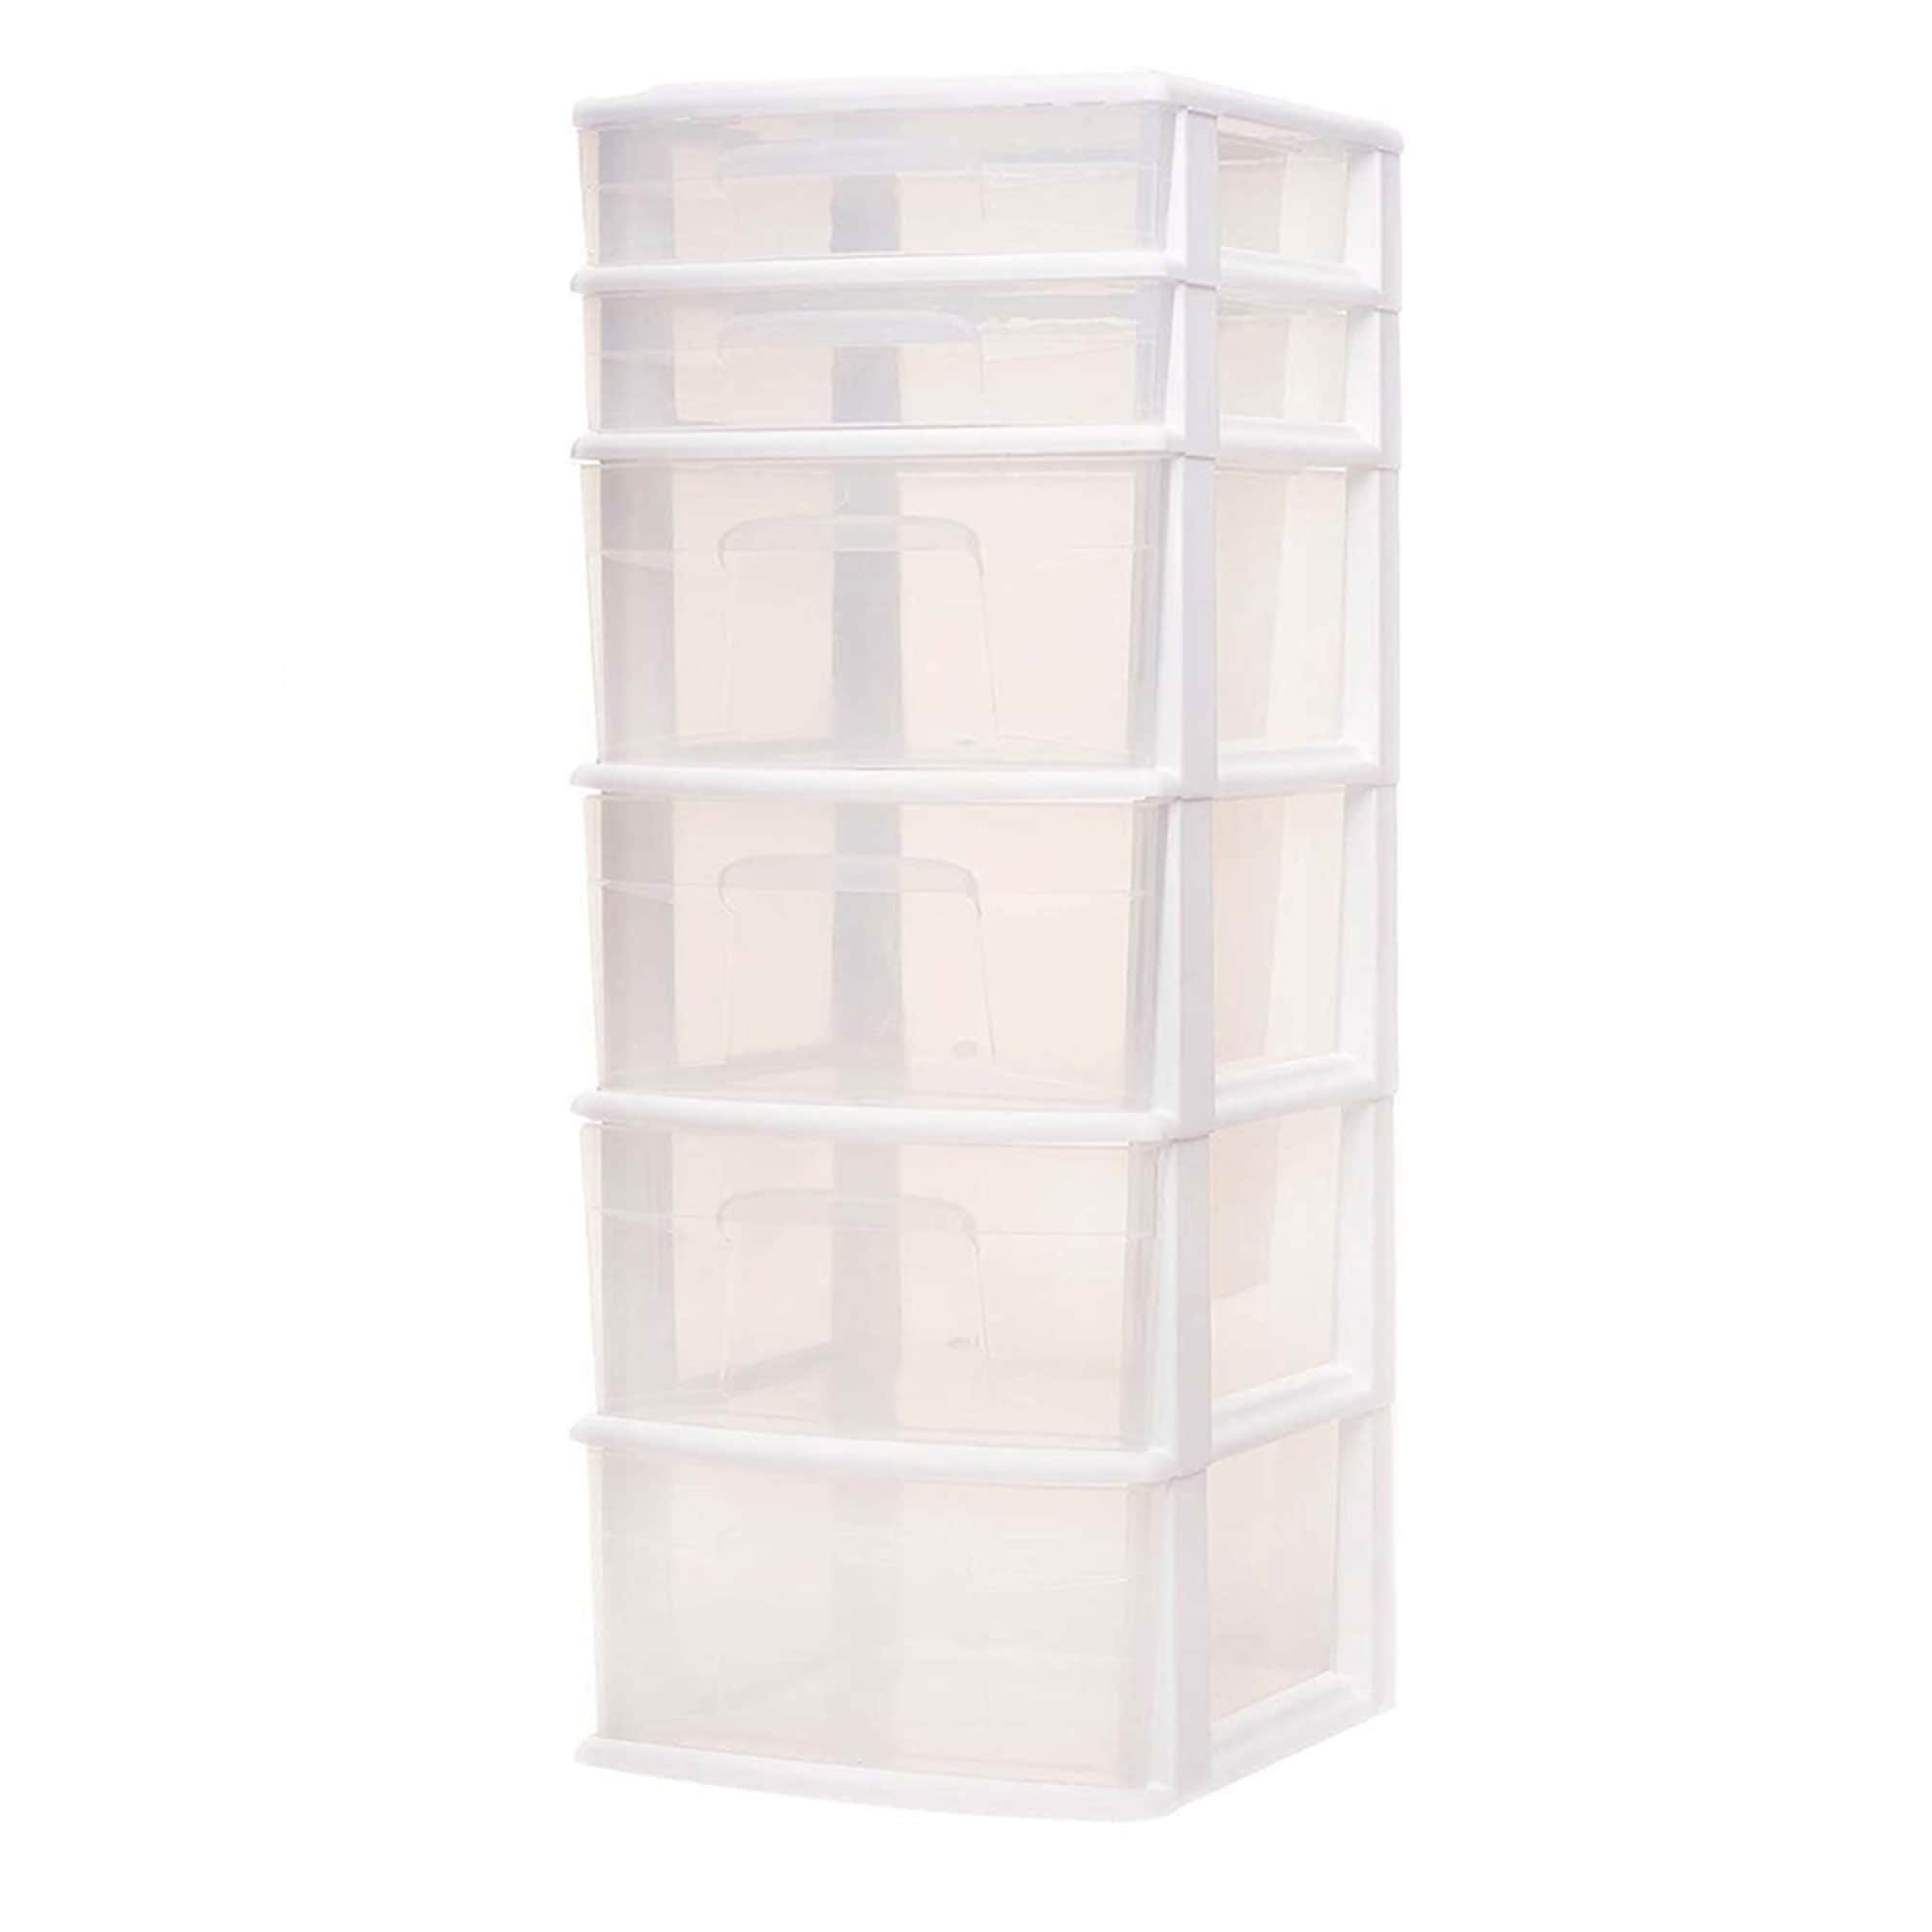 https://ak1.ostkcdn.com/images/products/is/images/direct/2cb8a822e07cda1ab8ff7db8c4834c1a955f27a1/Homz-6-Drawer-Plastic-Bedroom-%26-Closet-Organizer-Storage%2C-Clear-Black-Frame.jpg